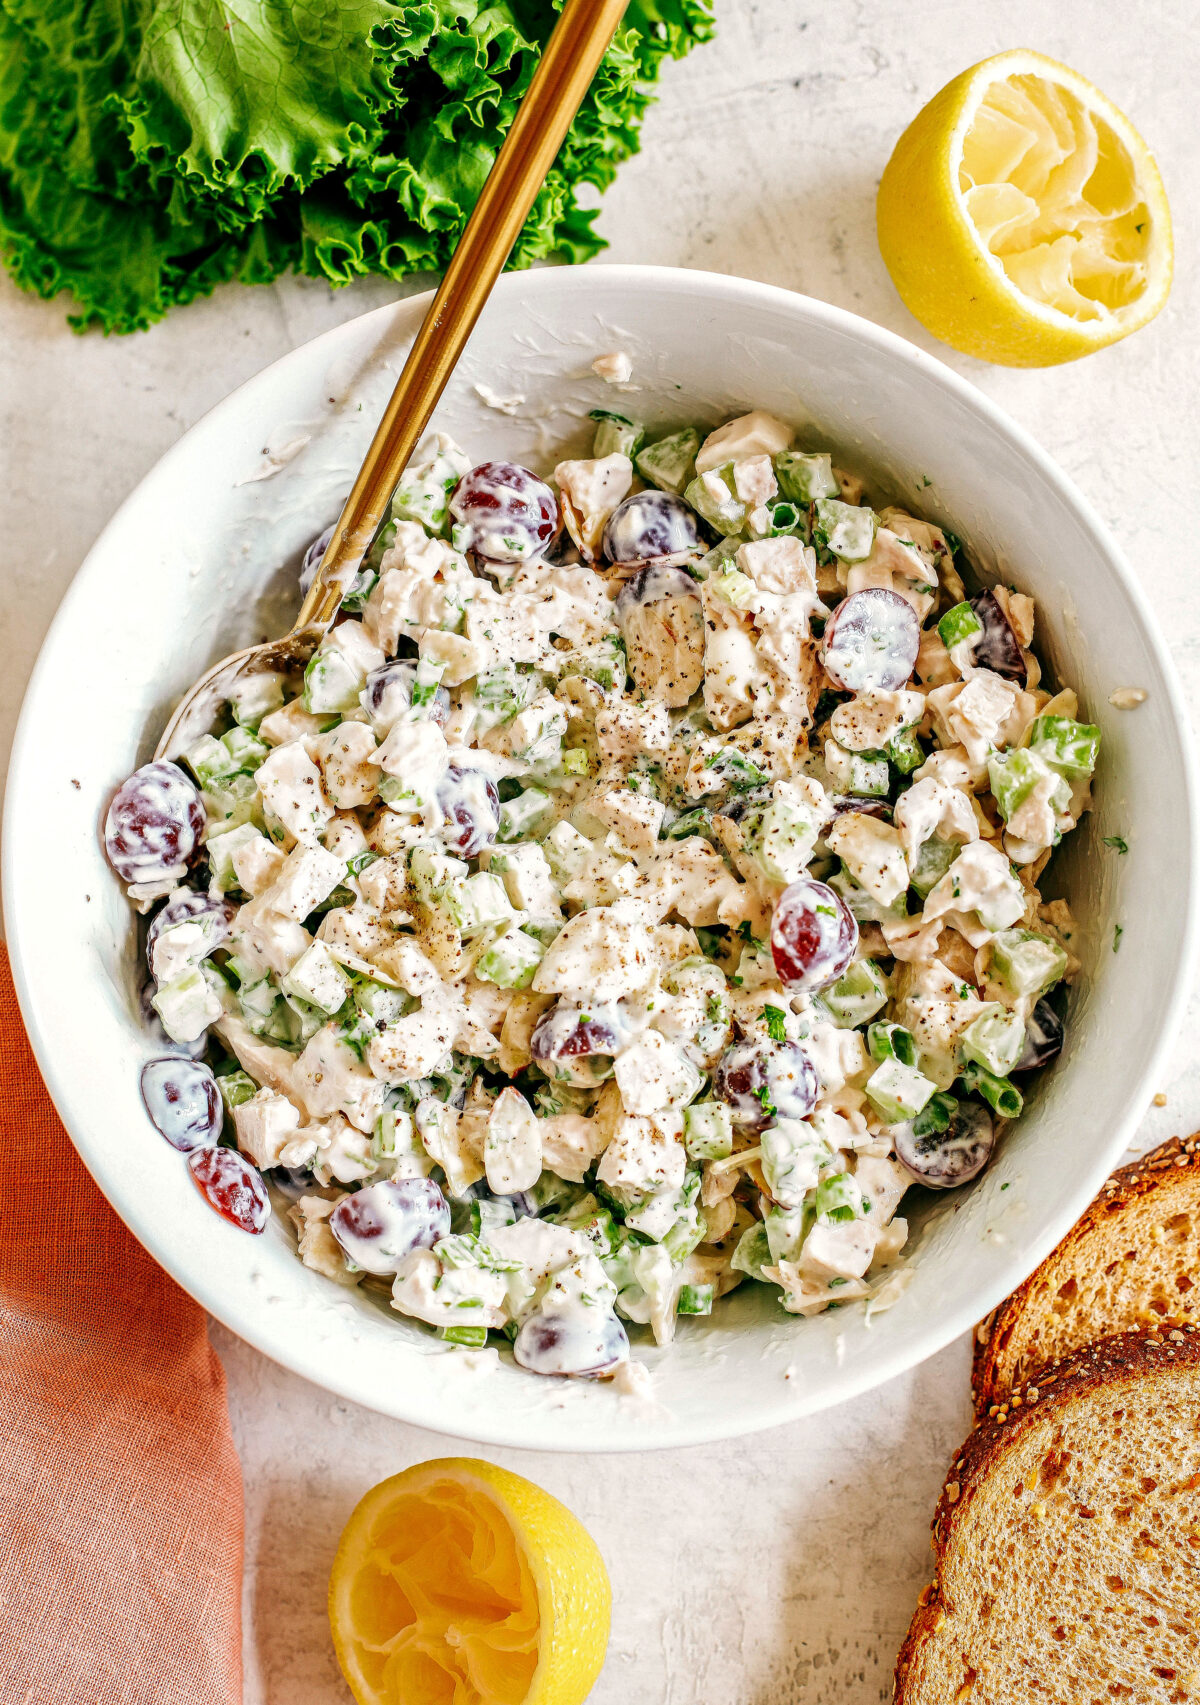 Healthy Chicken Salad made with tender chicken, Greek yogurt instead of mayo, crunchy celery, grapes, and sliced almonds for a delicious spin on a classic favorite!